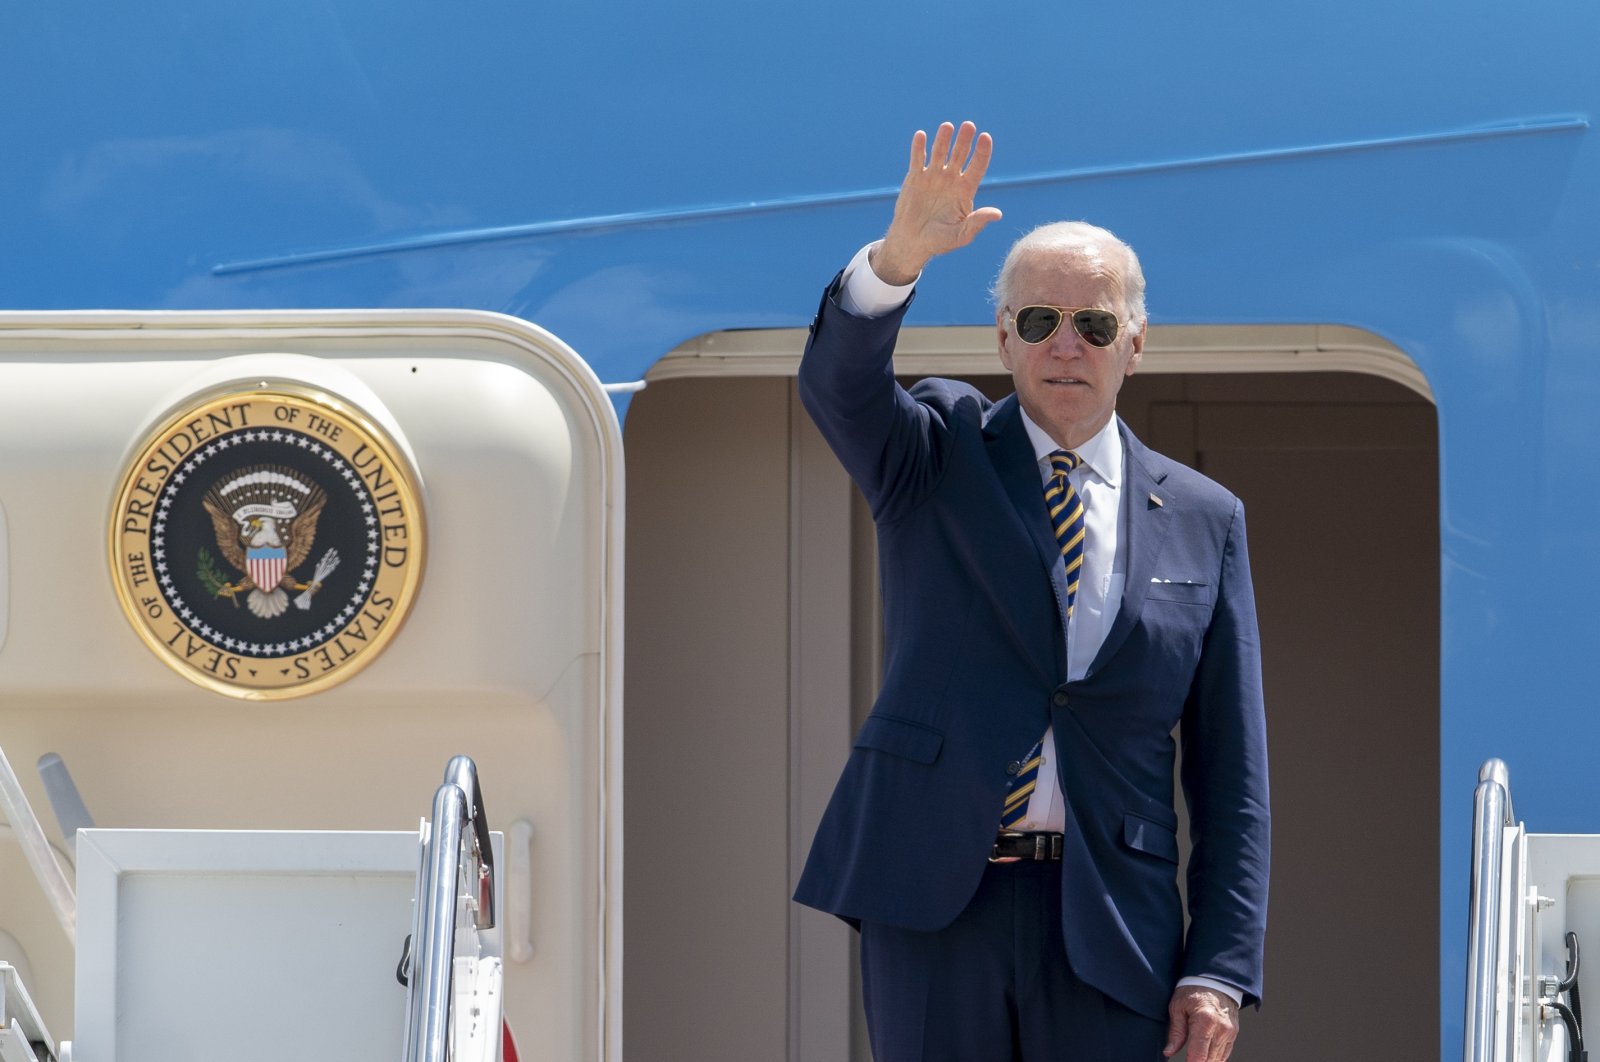 President Joe Biden waves as he boards Air Force One at Andrews Air Force Base, Md., Thursday, May 19, 2022, to travel to Seoul, Korea to begin his first trip to Asia as President. (AP Photo/Gemunu Amarasinghe)